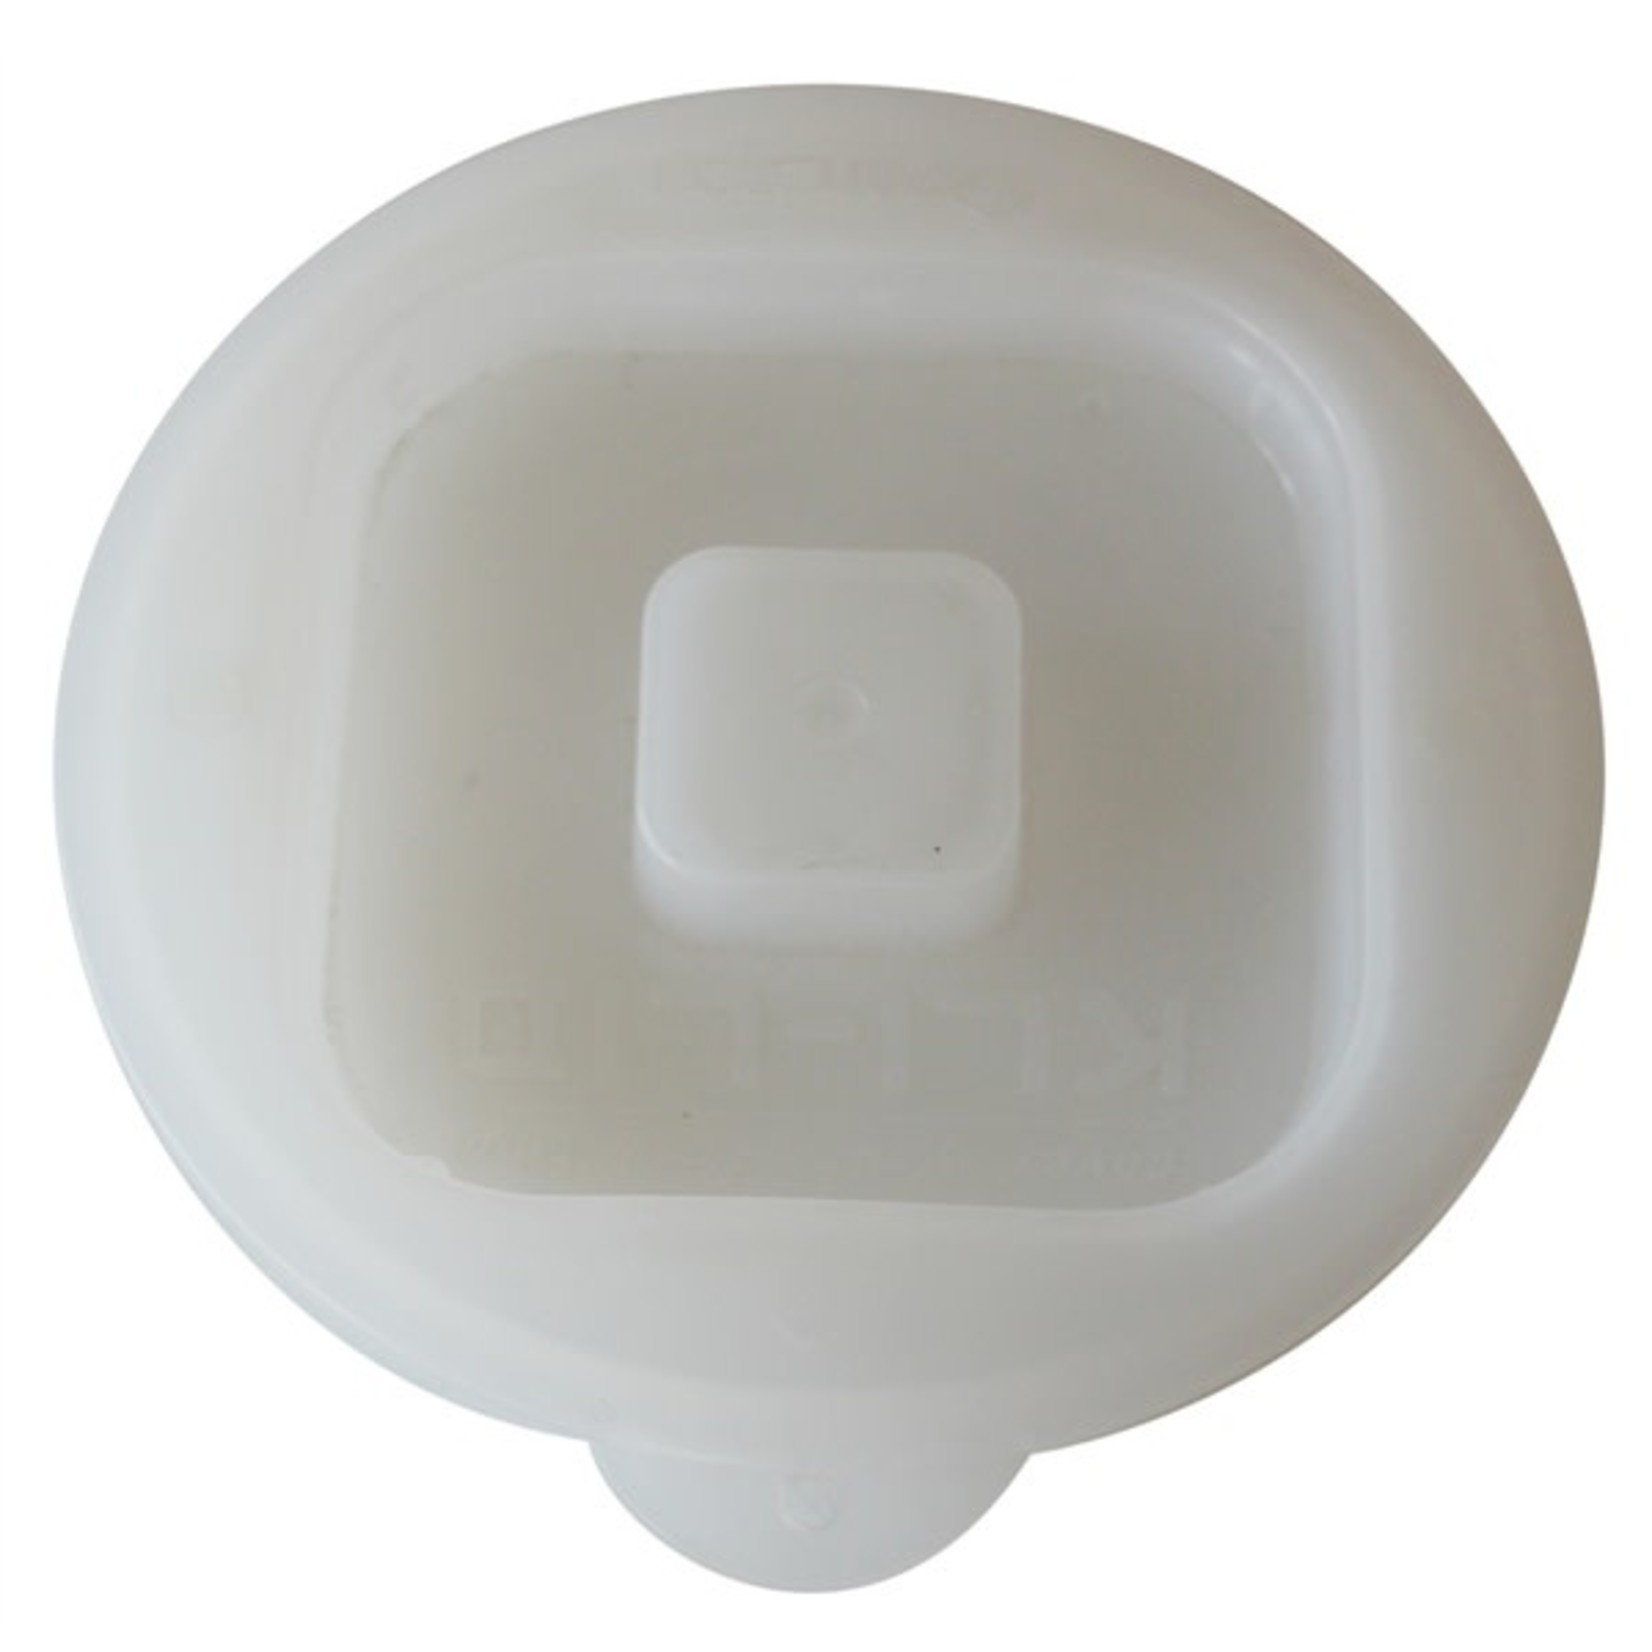 Lid for Plastic Washing Cup